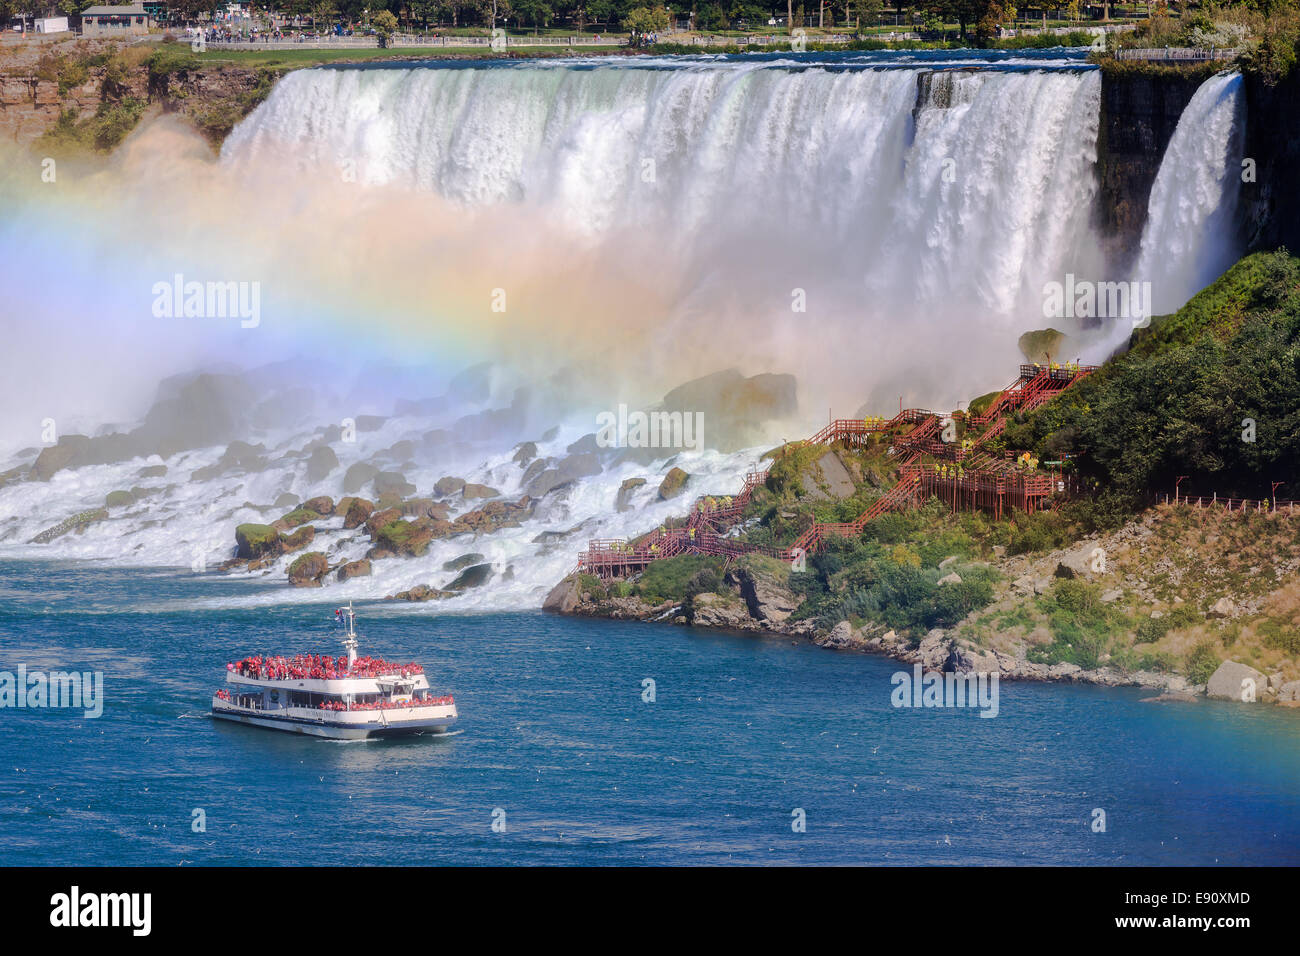 The Hornblower loaded with tourists in fron of the American Falls, part of the Niagara Falls, Ontario, Canada. Stock Photo